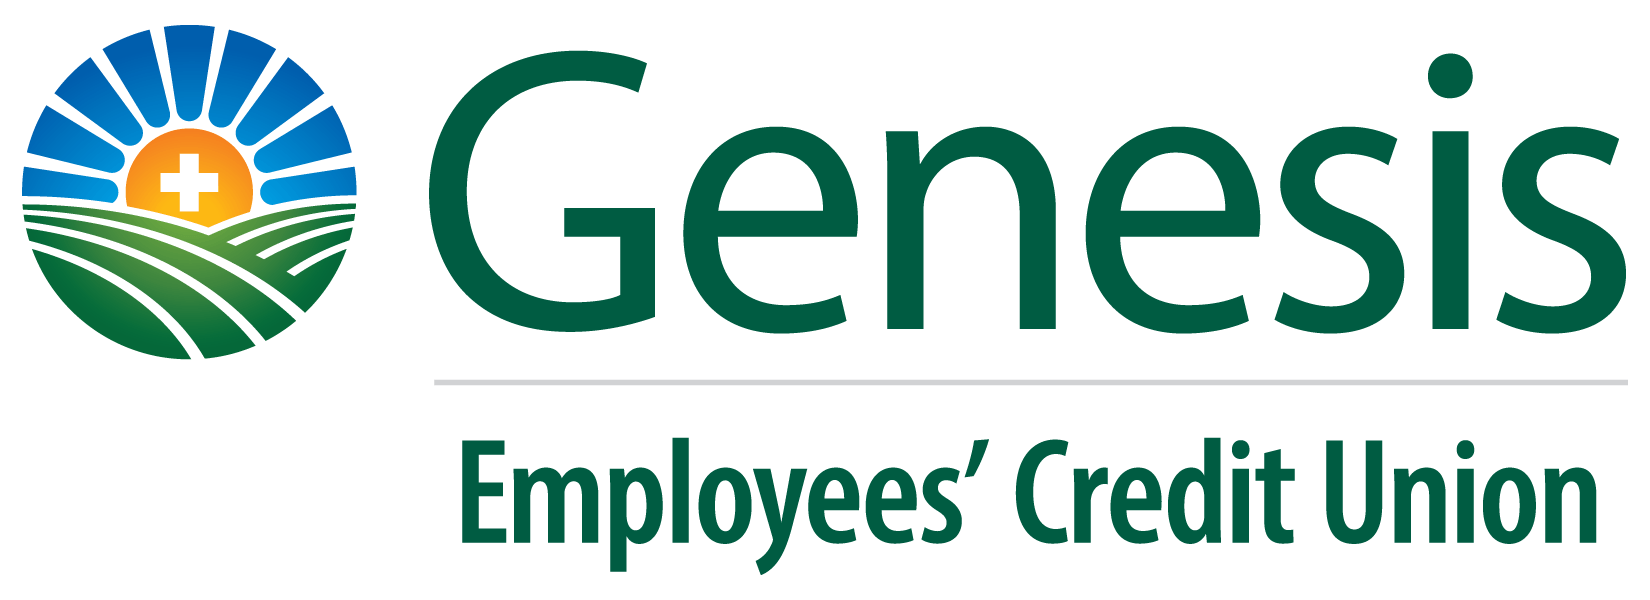 Genesis Hospital Logo - GENESIS EMPLOYEE$' CREDIT UNION - Meeting Your Banking Needs With Care